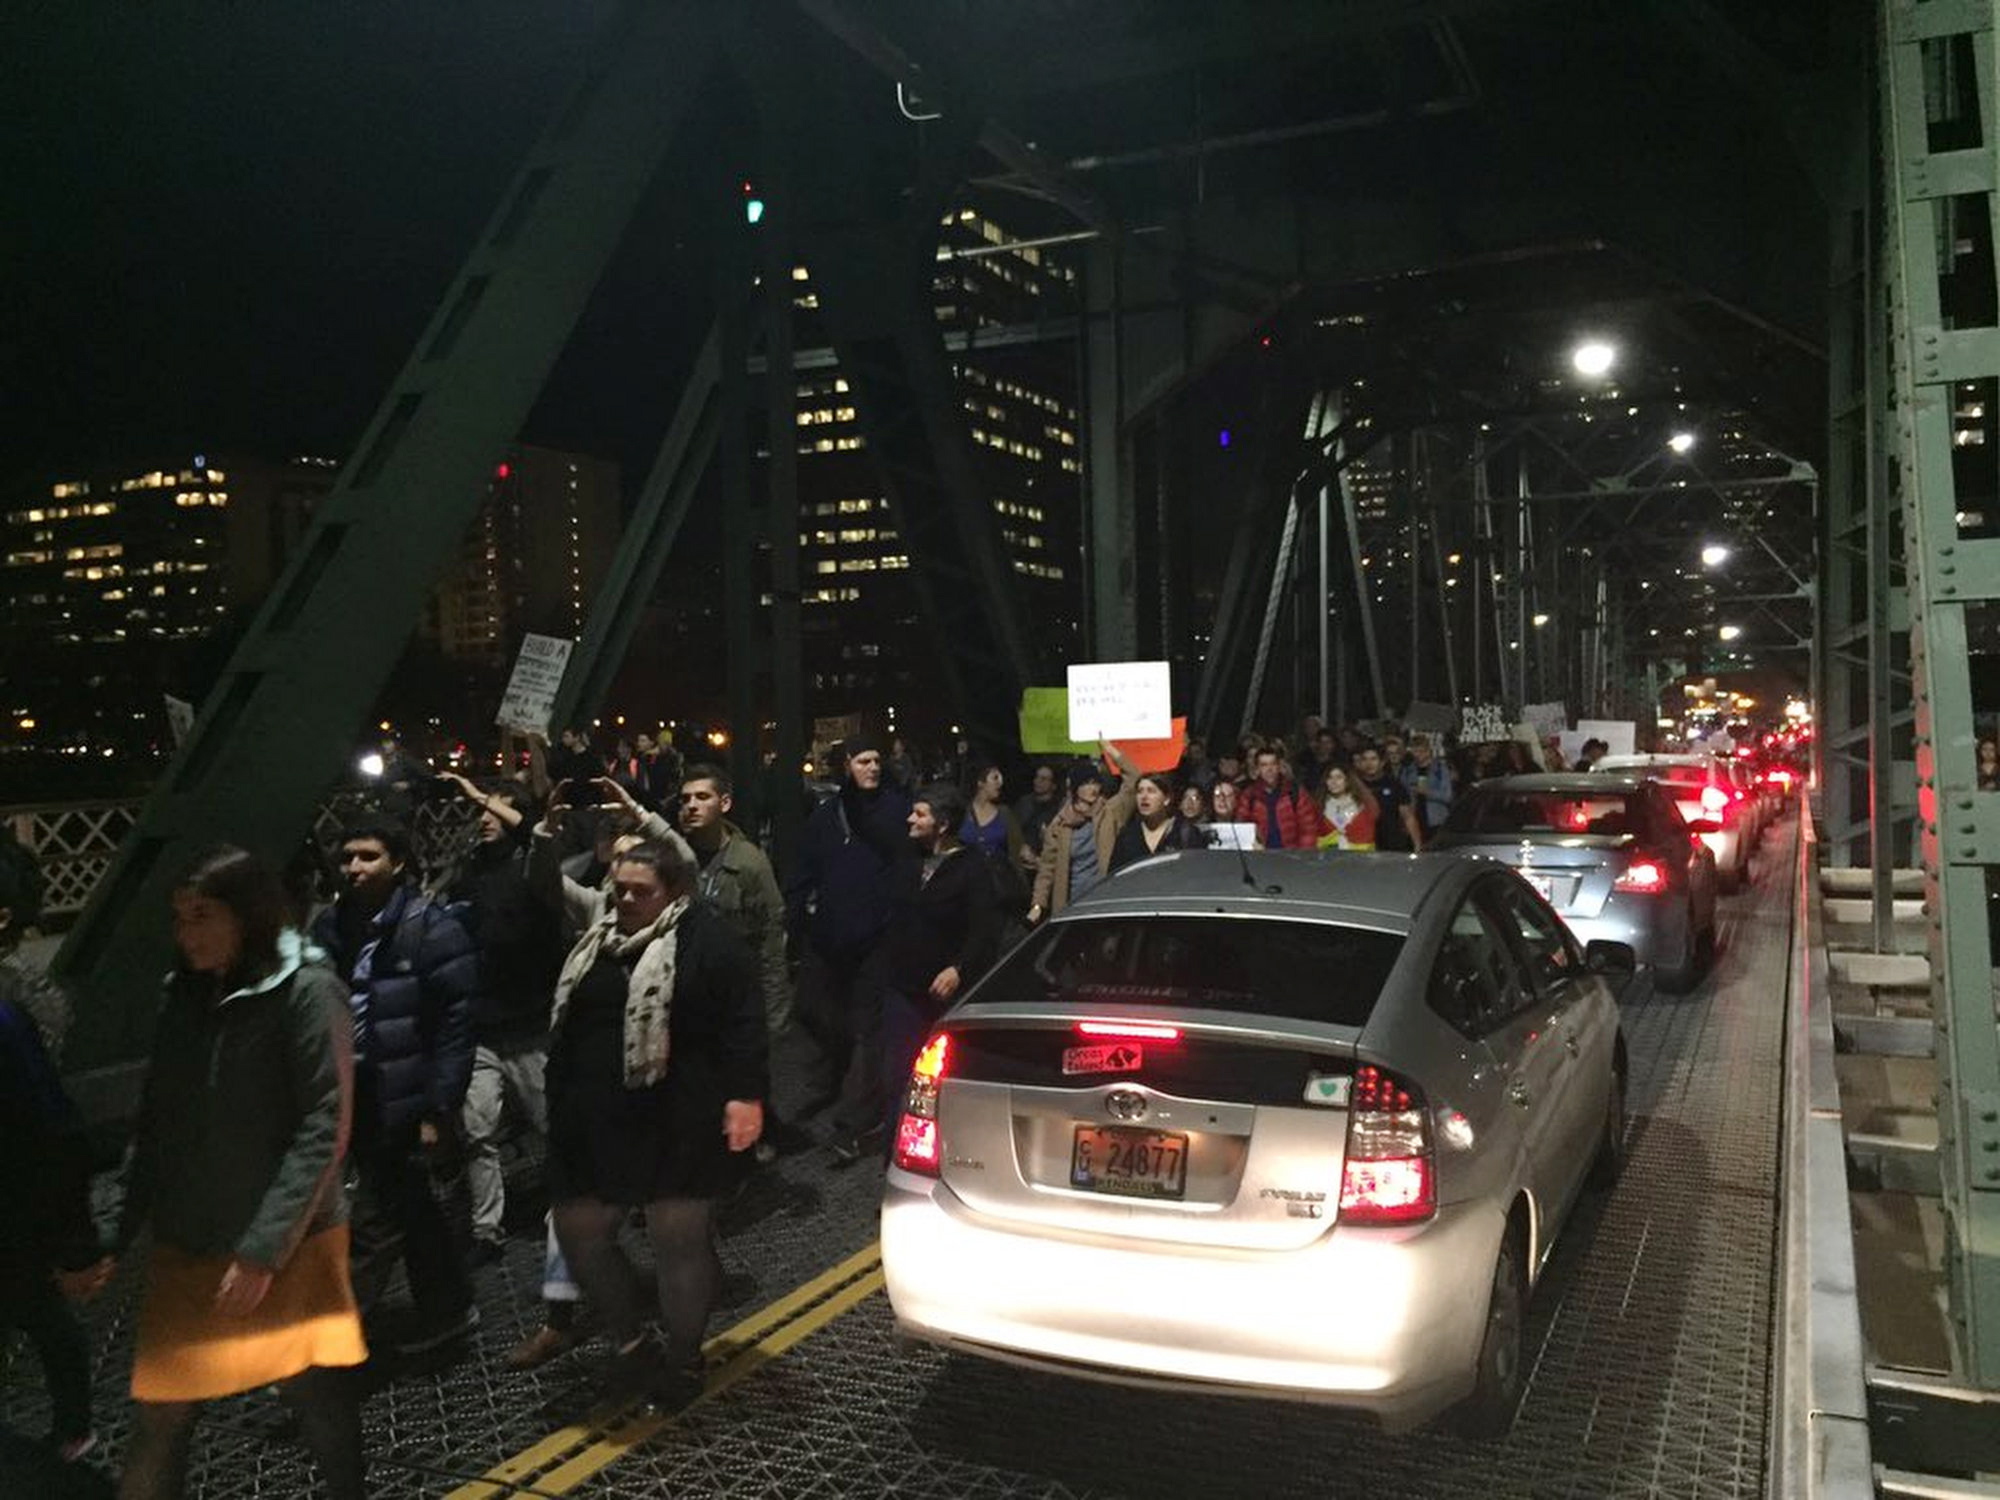 Protesters cross the Hawthorne Bridge in Portland, Ore., on the third day of protests over the results of the 2016 U.S. presidential election, Thursday, Nov. 10, 2016. President-elect Donald Trump fired back on social media after demonstrators in both red and blue states hit the streets for another round of protests, showing outrage over the Republican's unexpected win.